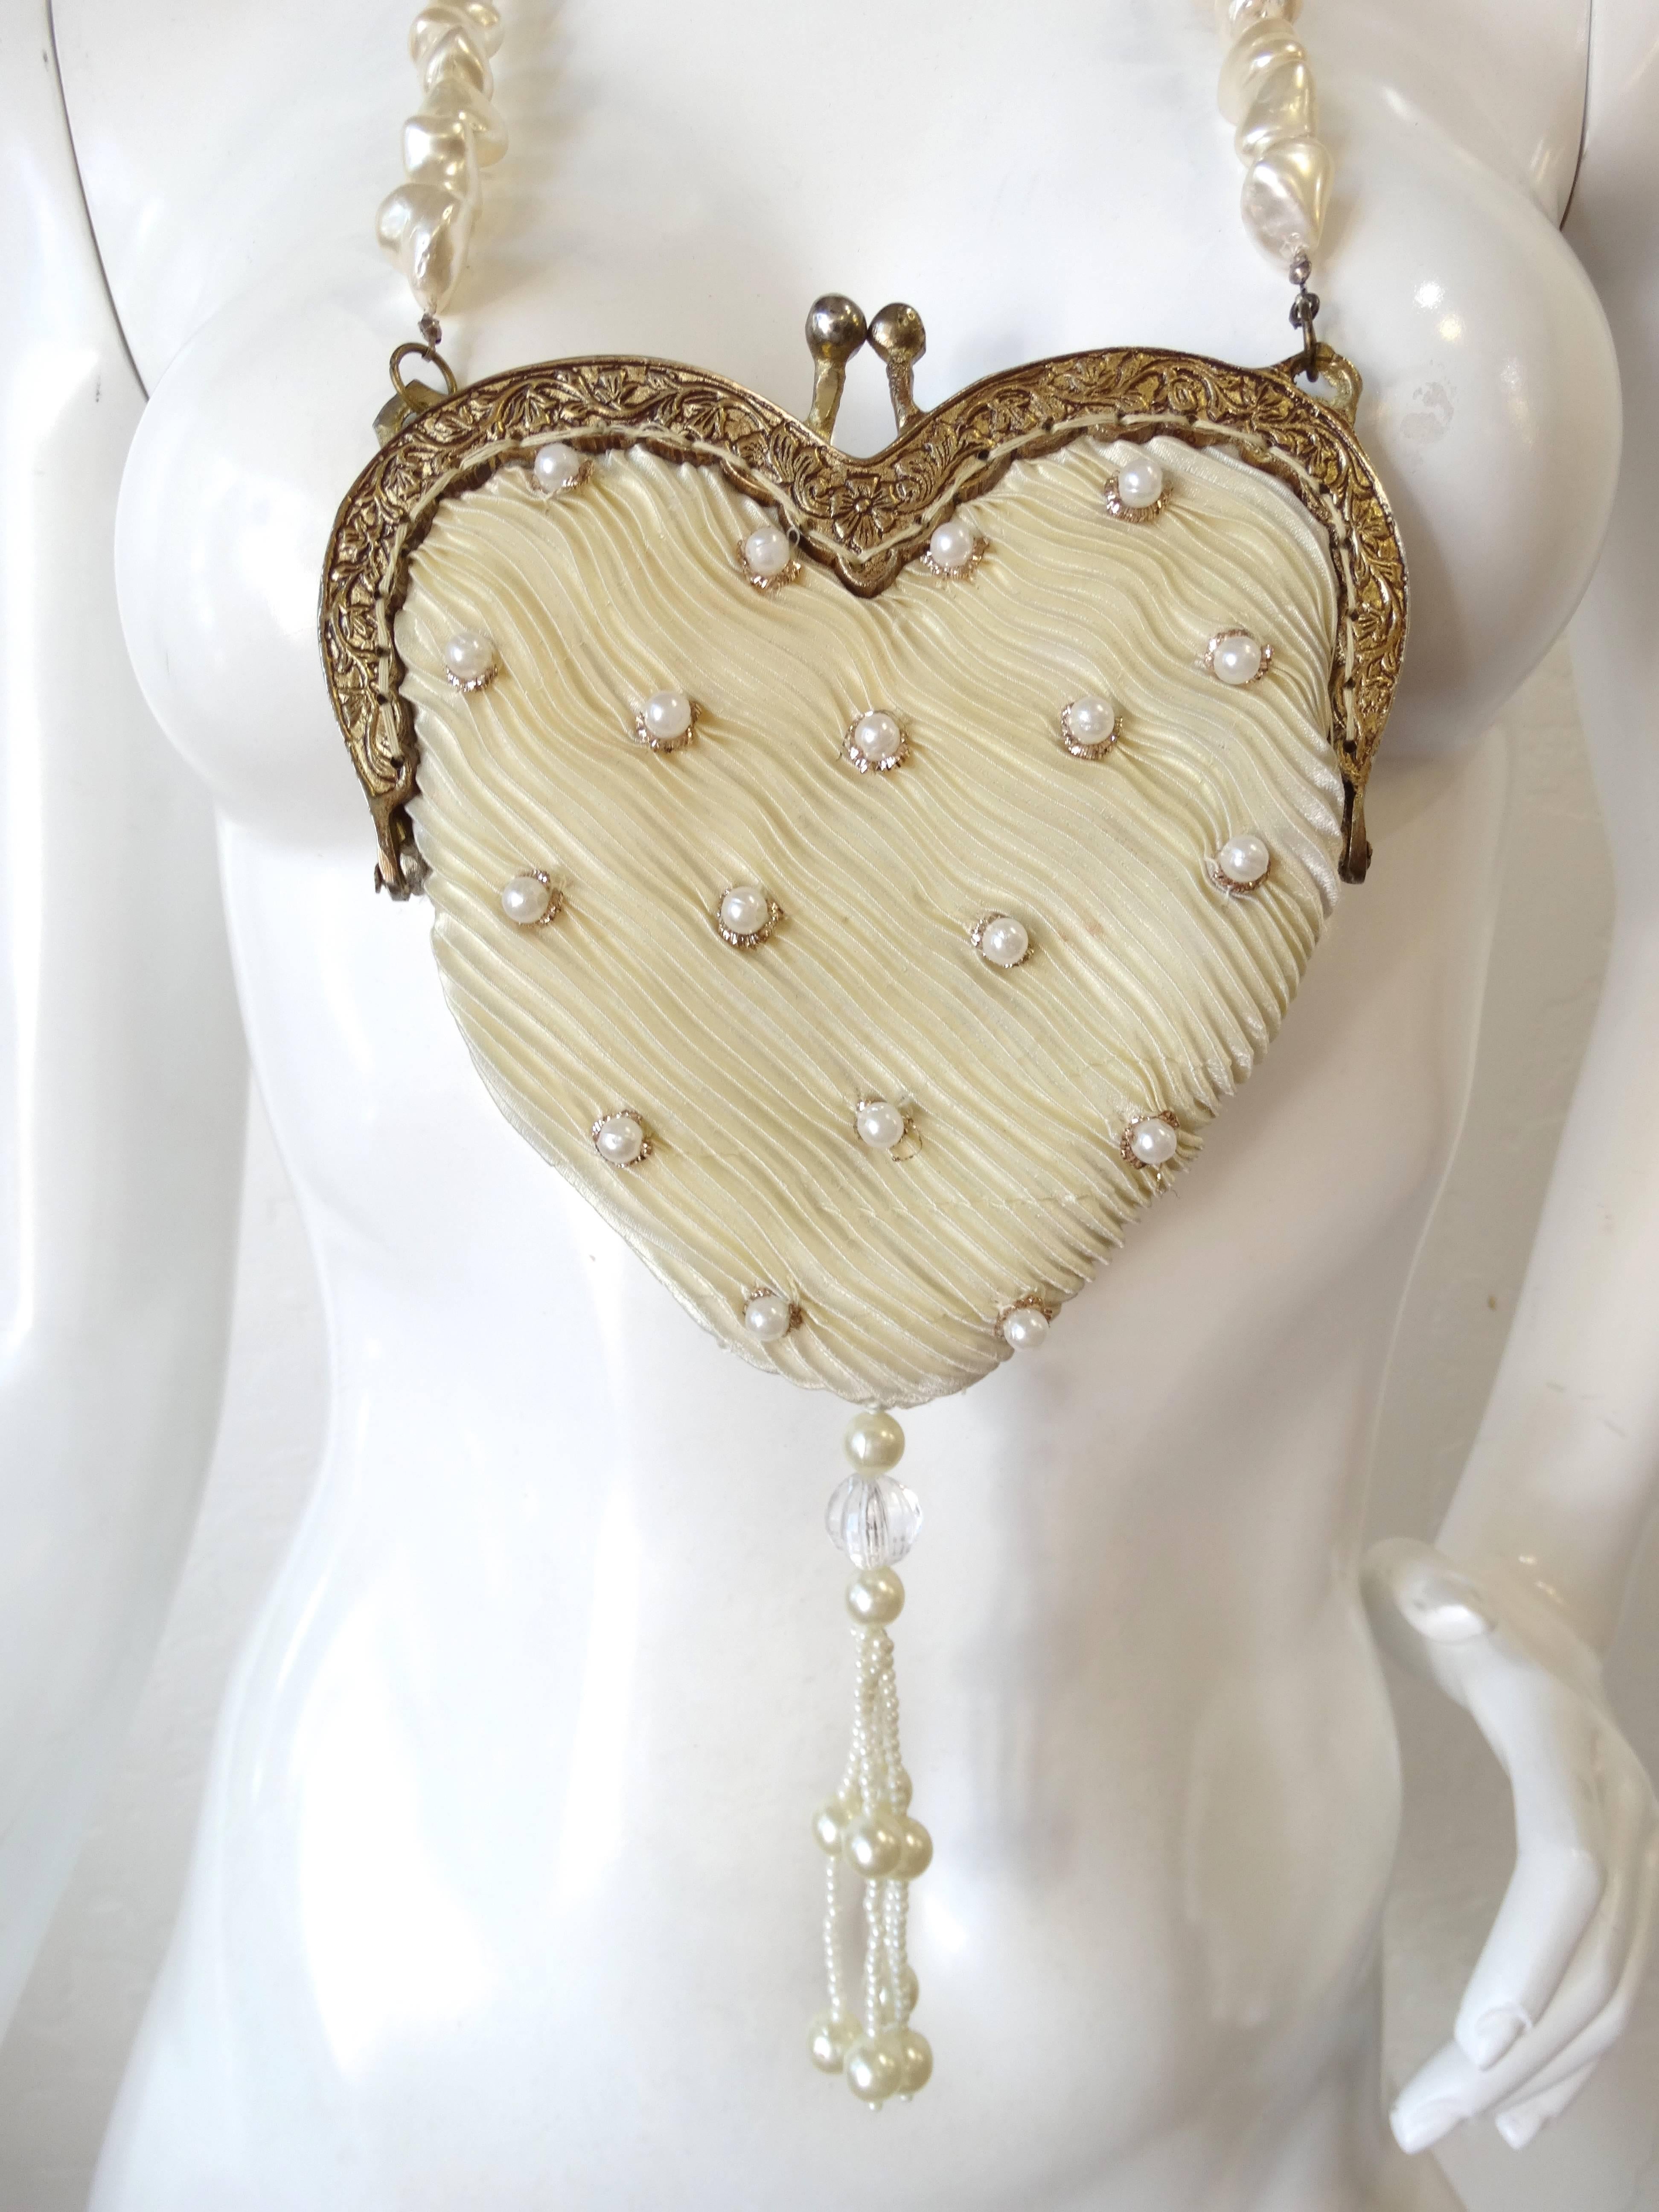 Amazing 1980s heart shaped bag with pearl strap! Micro-pleated cream colored fabric accented with gold thread and pearl beads throughout. Heart shaped construction with metal kiss lock frame. Long freshwater pearl strand strap. Wear around the neck